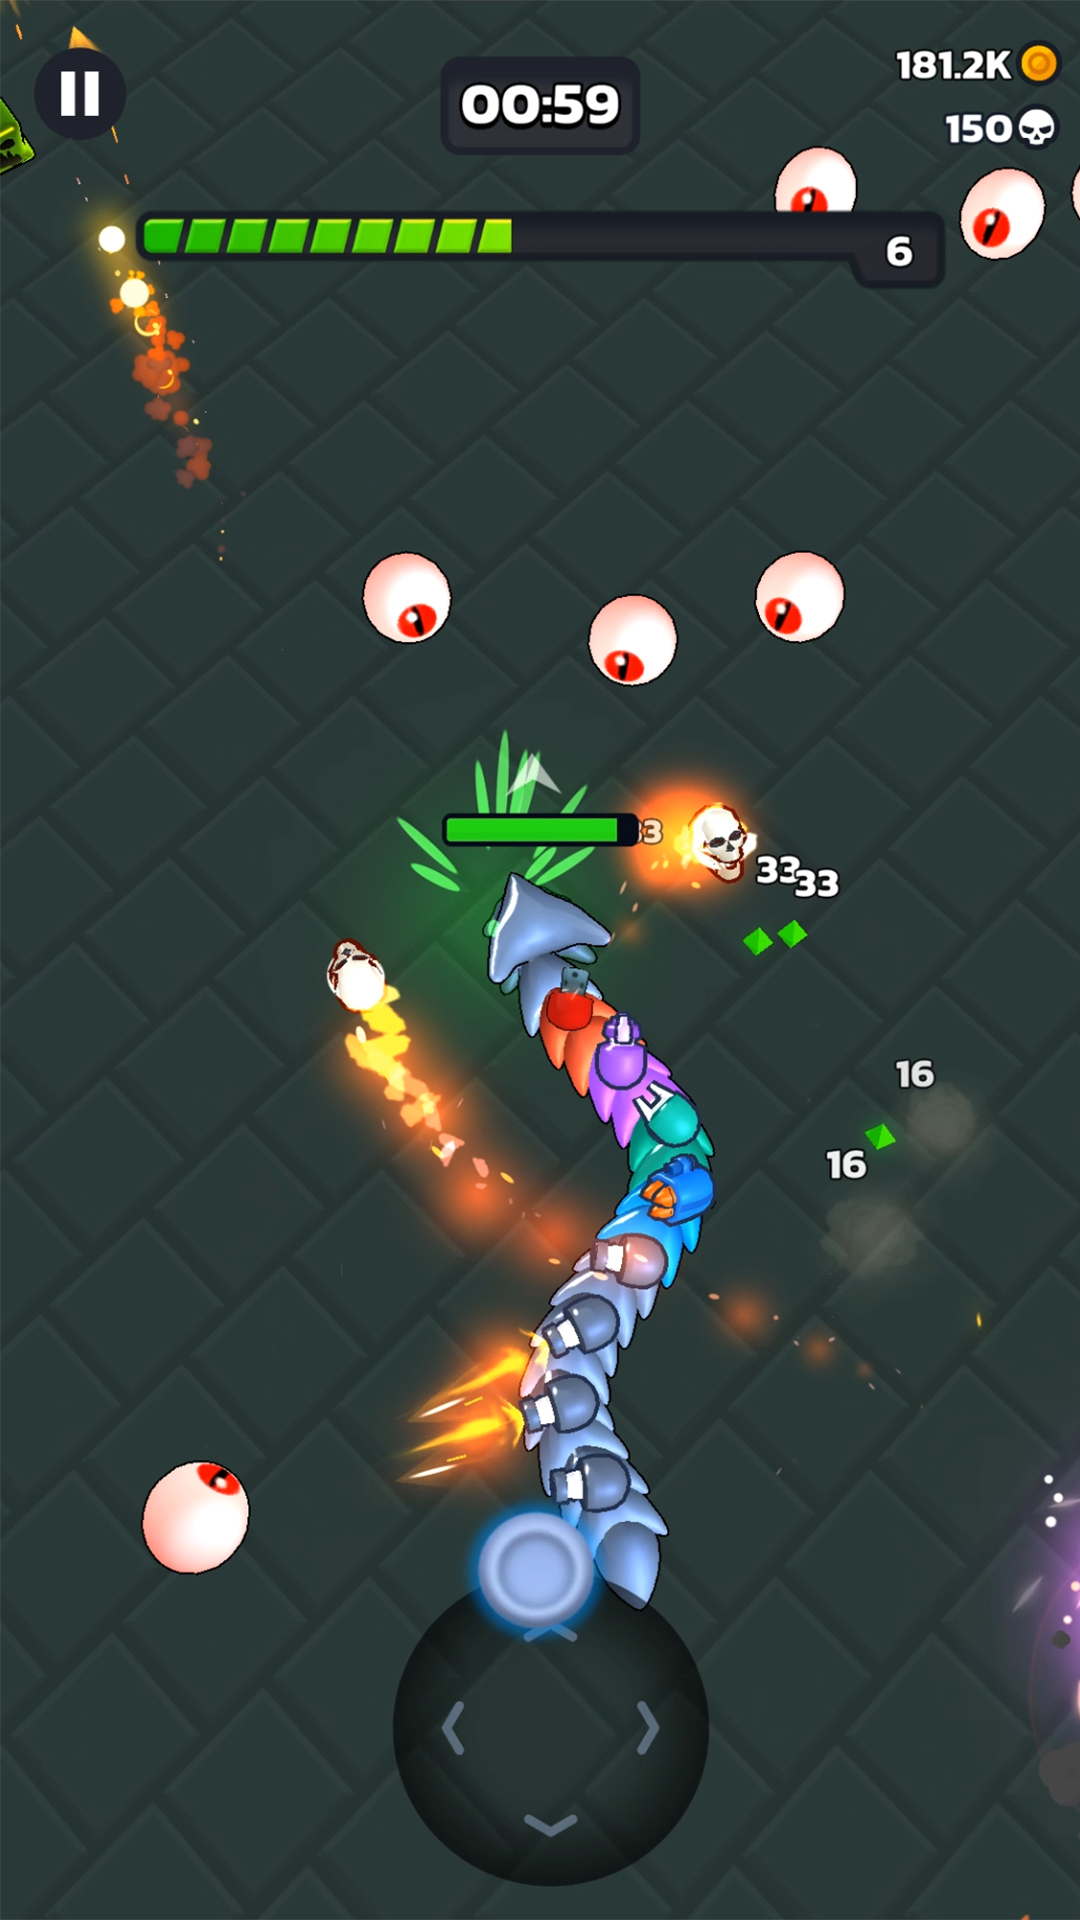 Gameplay of the Battle Snakes for Android phone or tablet.